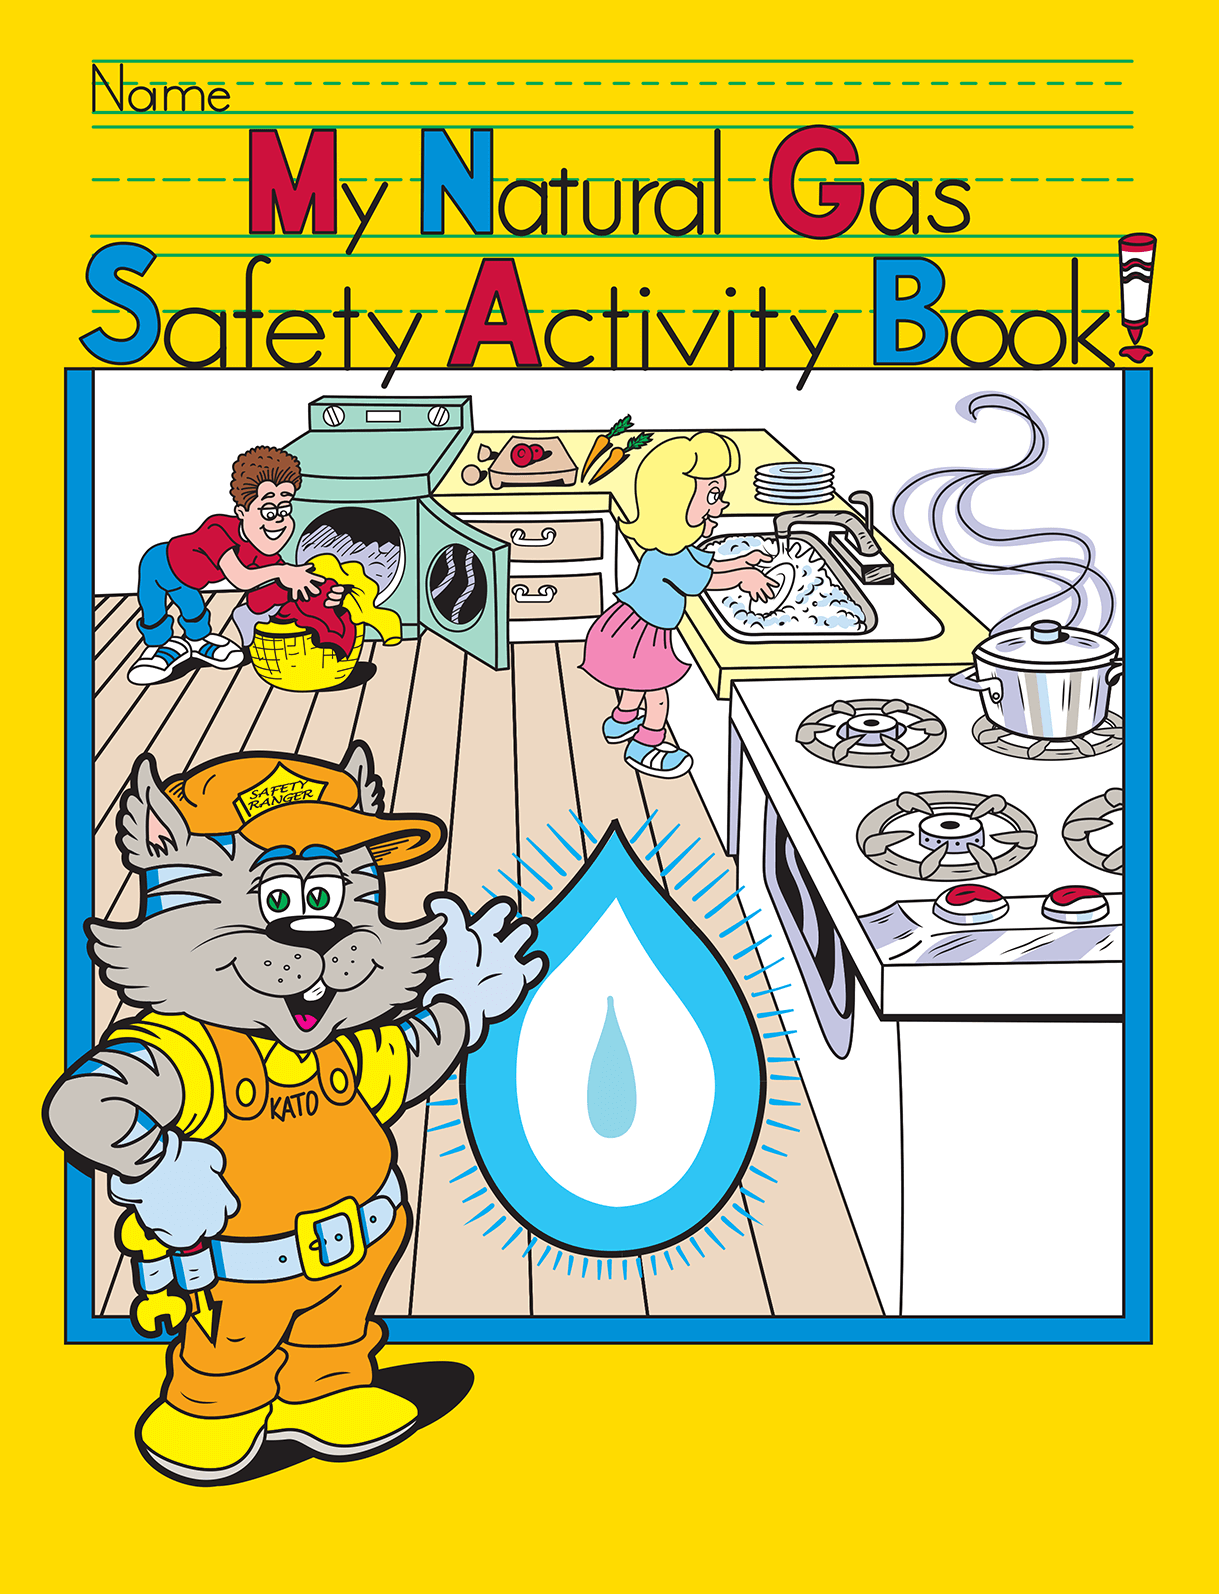 Illustrated My Natural Gas Safety Activity Book cover